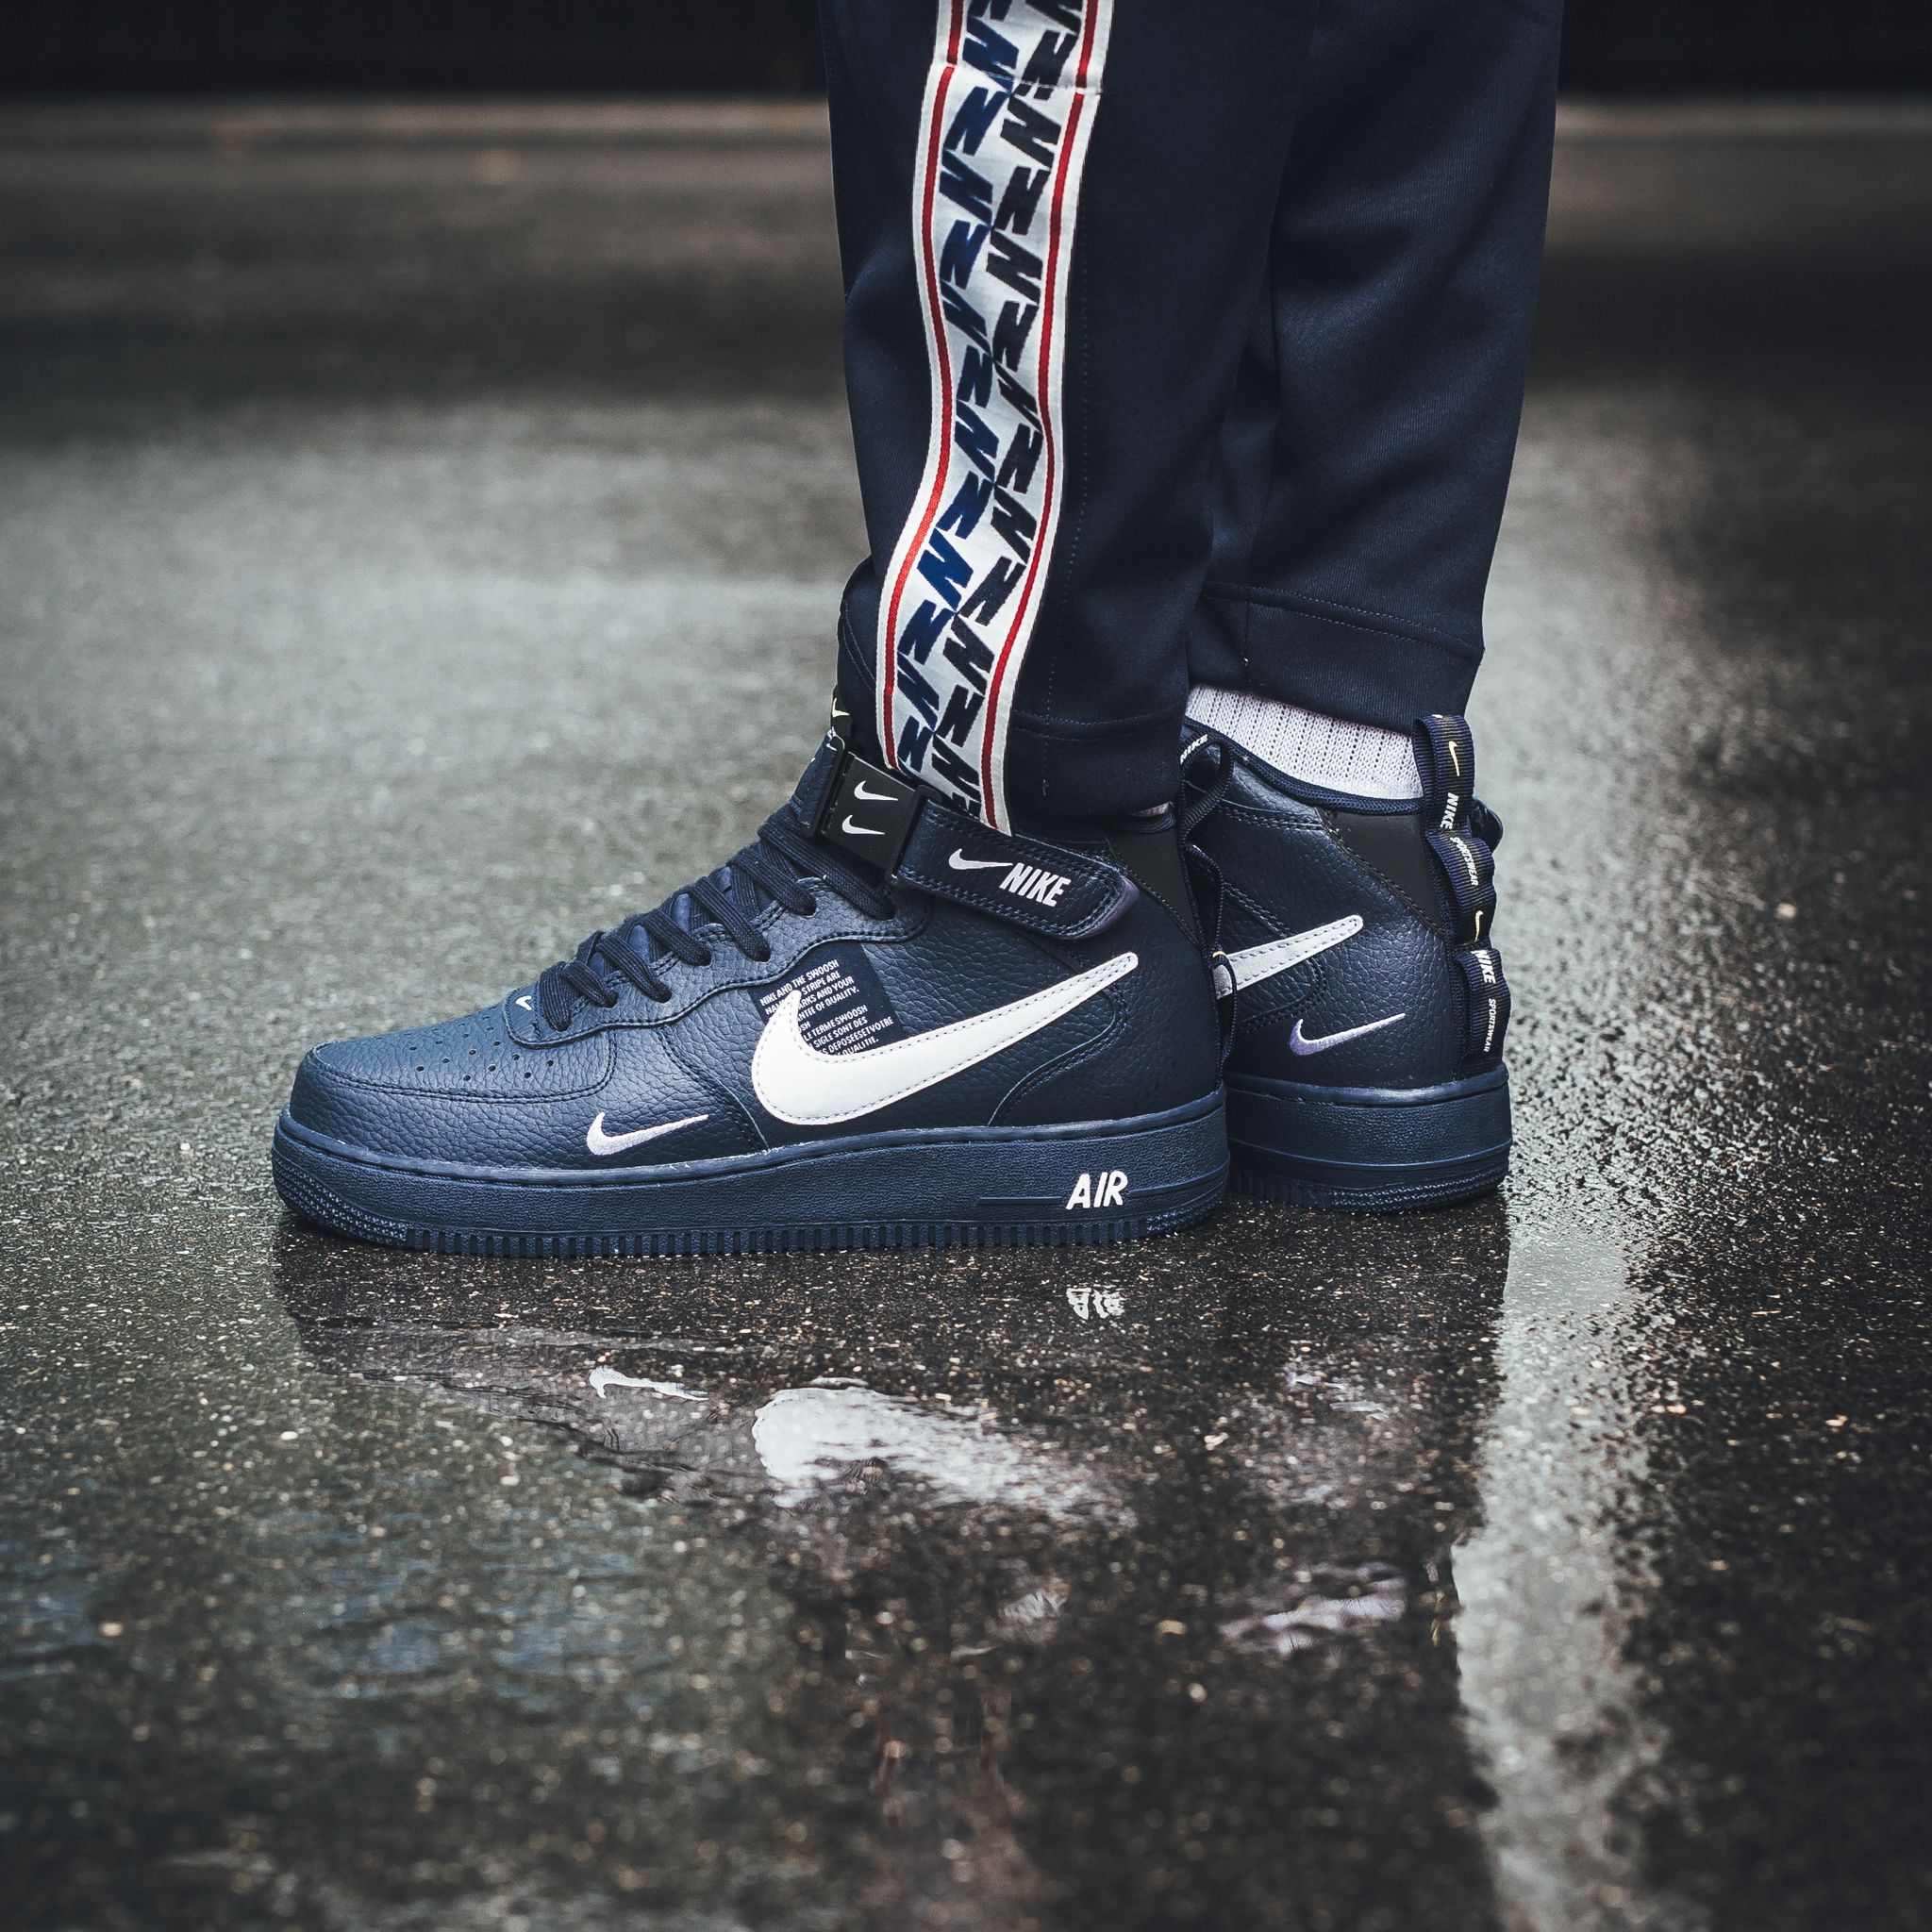 Titolo on X: new in 🔵 Nike Air Force 1 Mid '07 Lv8 -  Obsidian/White-Black-Tour Yellow available for purchase ➡️   #nike #af1 #airforceone #airforce1 #nikeaf1  #niketalk  / X